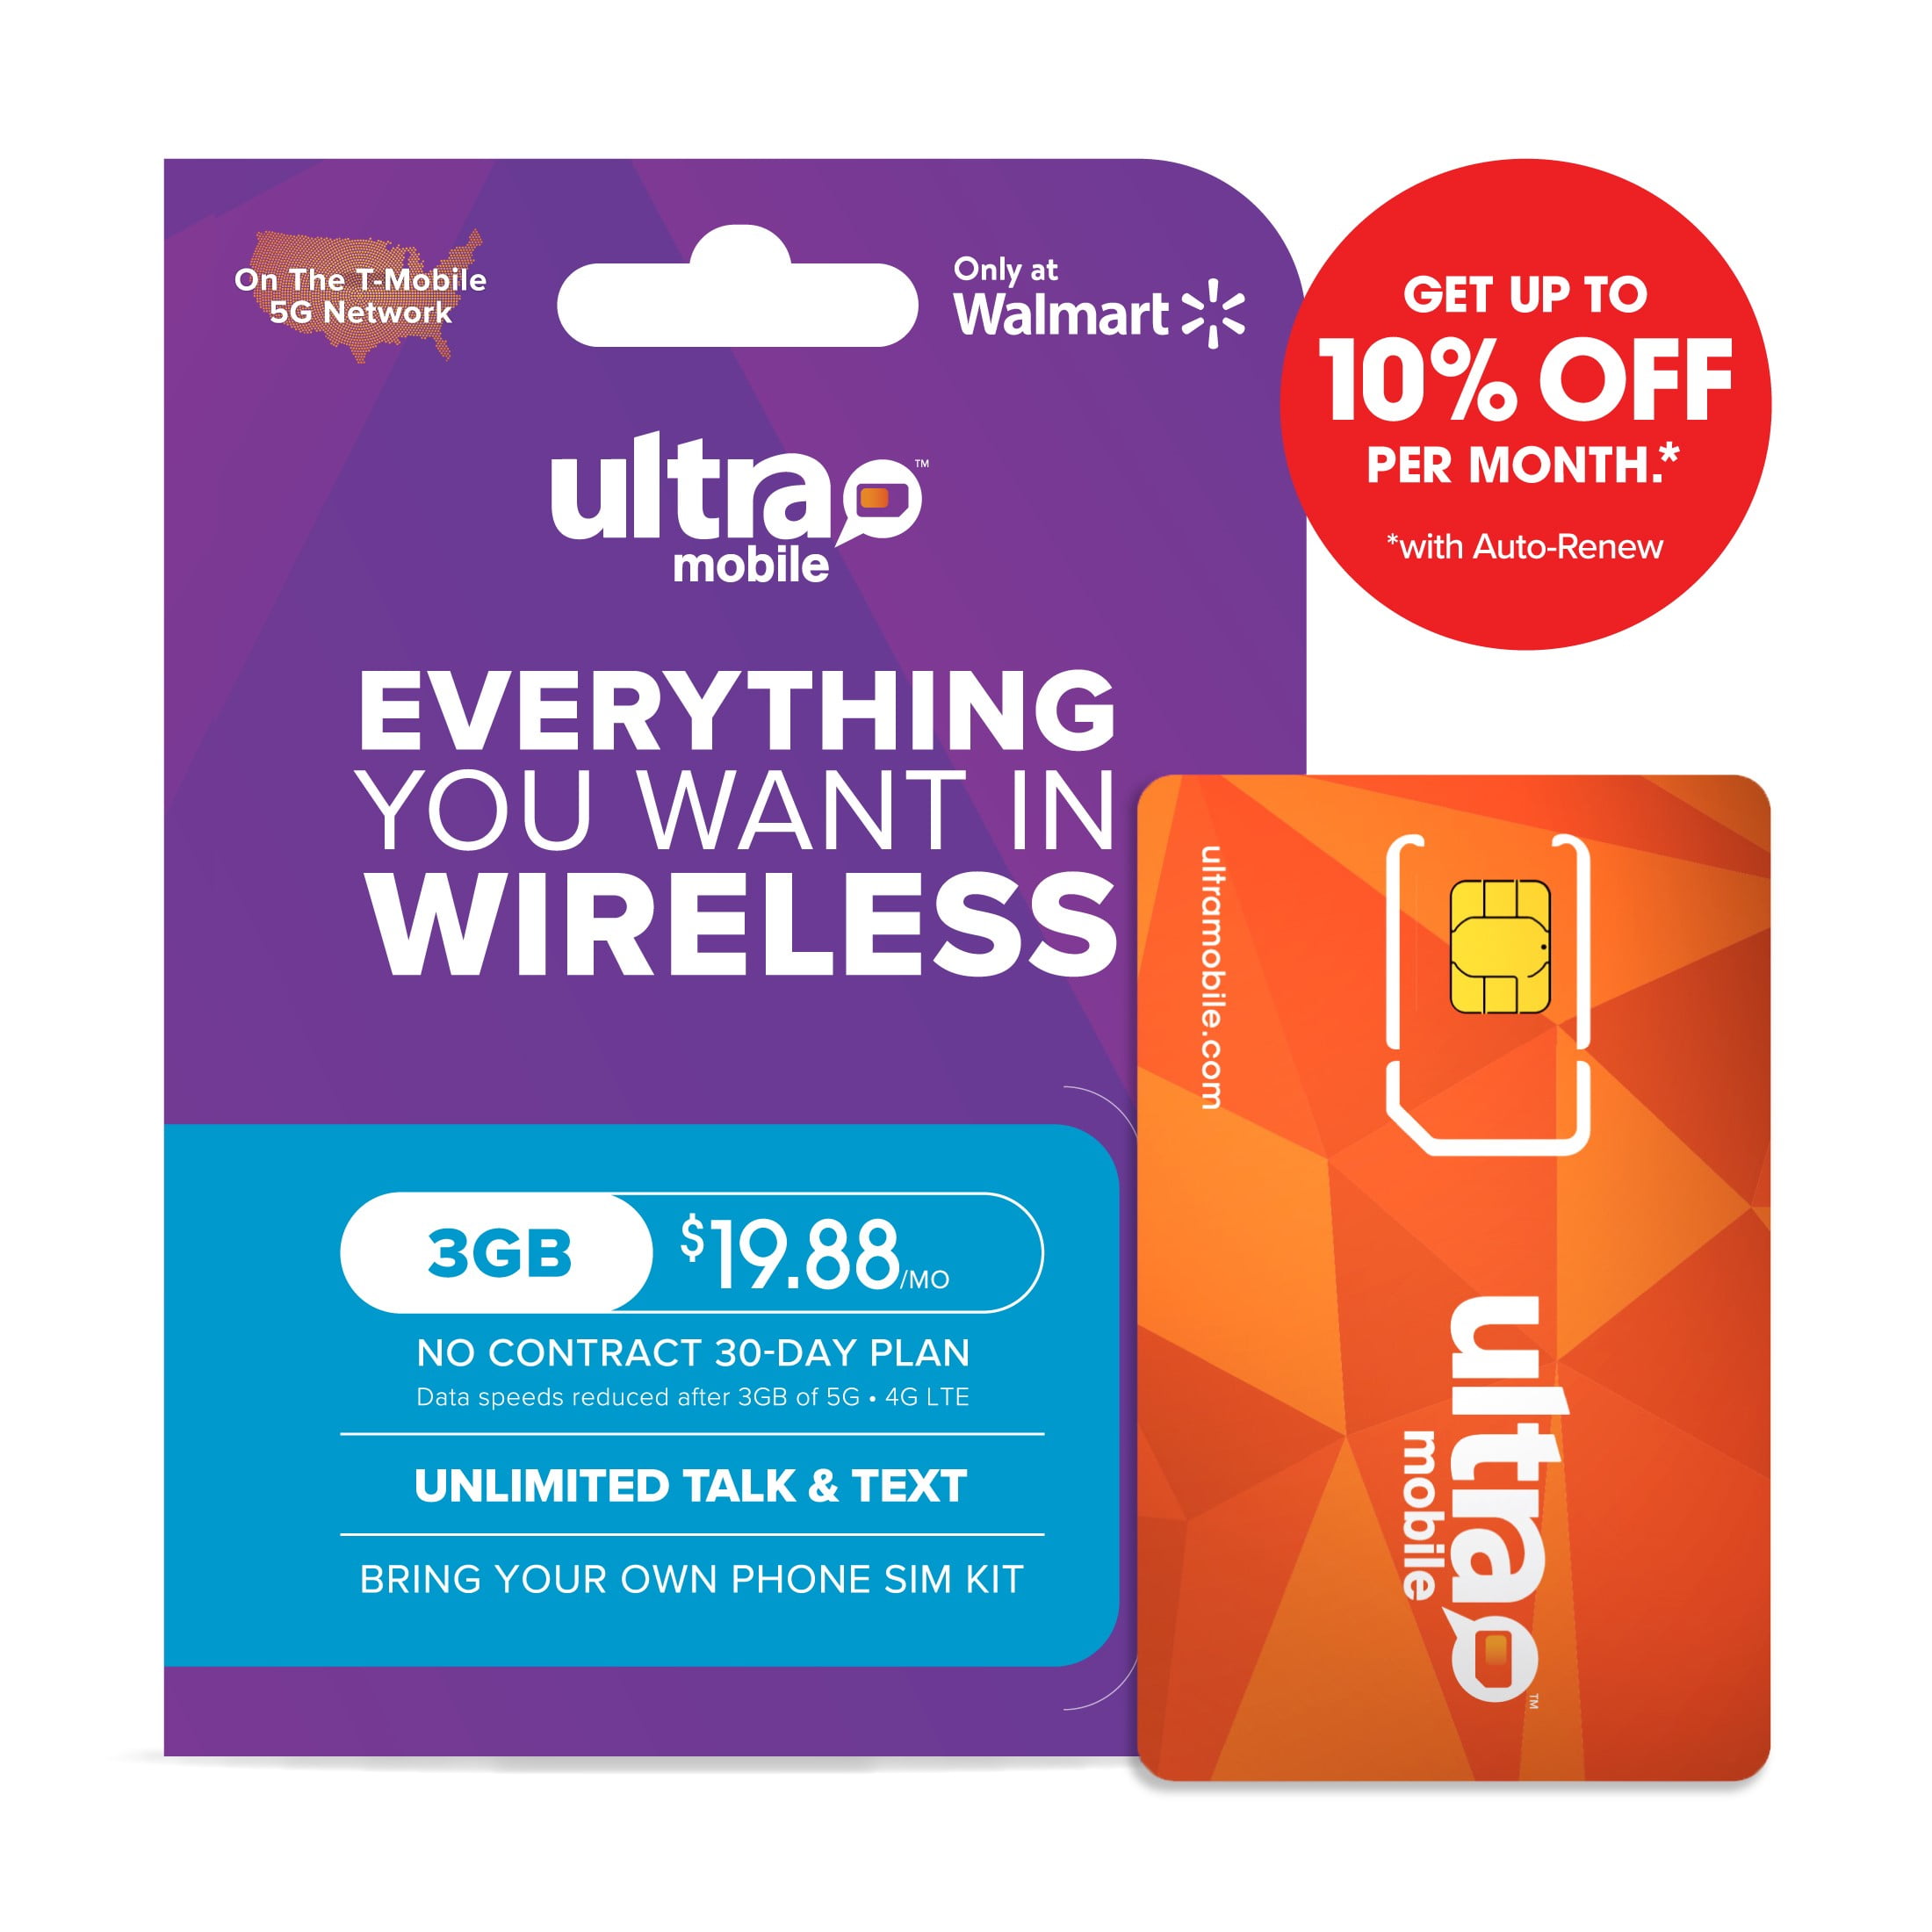 AT&T USA and Canada 7 Days Unlimited Data Travel SIM Card, 4G LTE/3G Data  for USA, and Canada for Unlocked iPhone, iPad, Android Phones,Tablets and